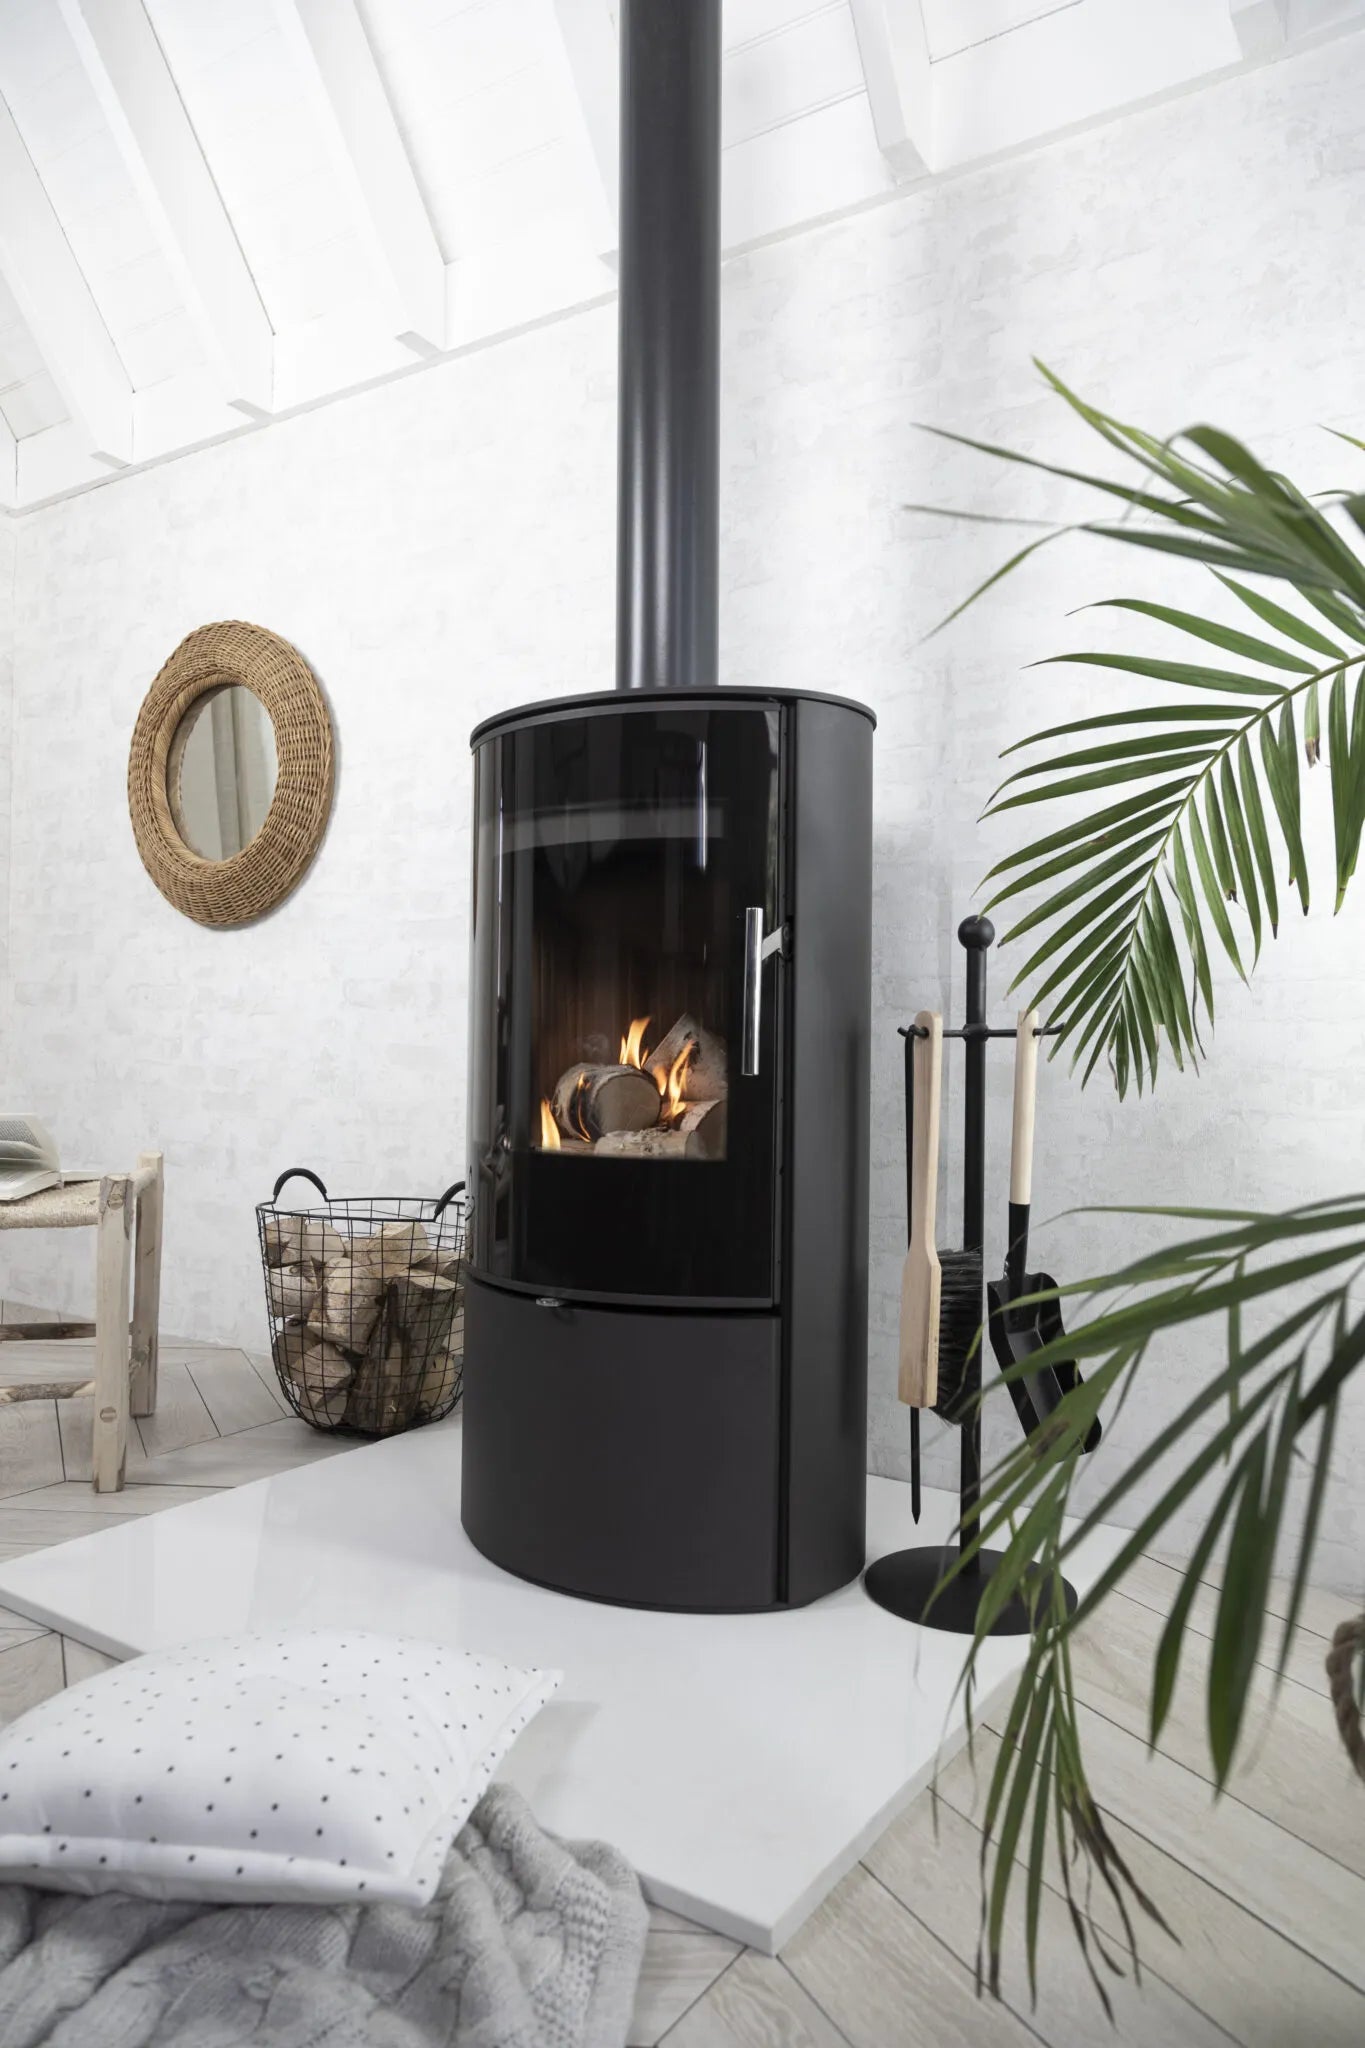 Cylindrical logburner in a very white room. Stove is an Arada Lagos and is lit